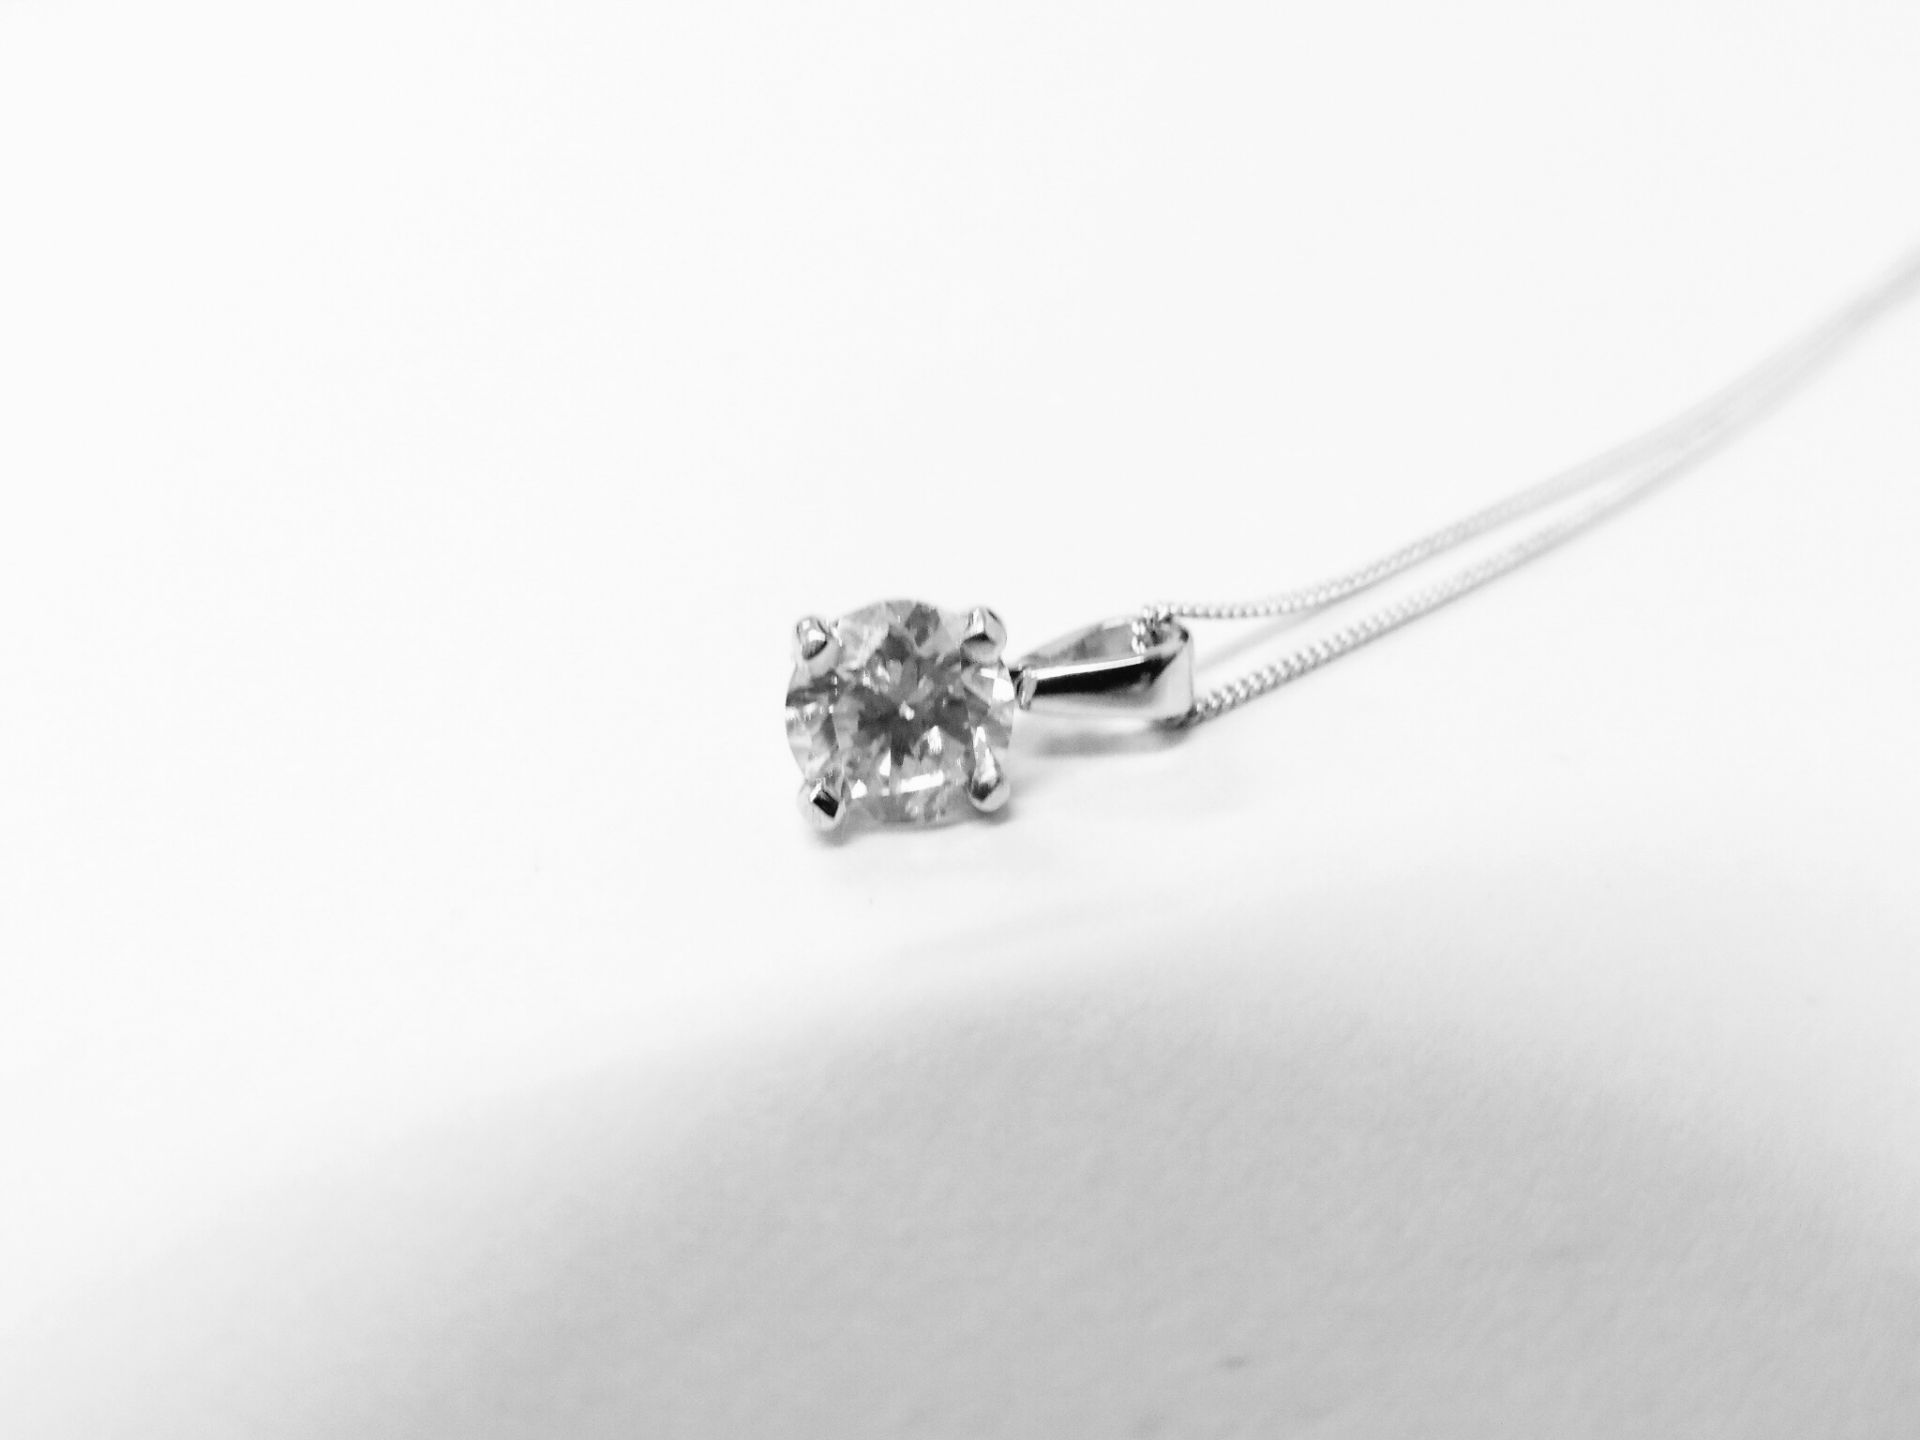 0.50ct diamond solitaire pendant set in 18ct gold. 4 claw setting - Image 3 of 4